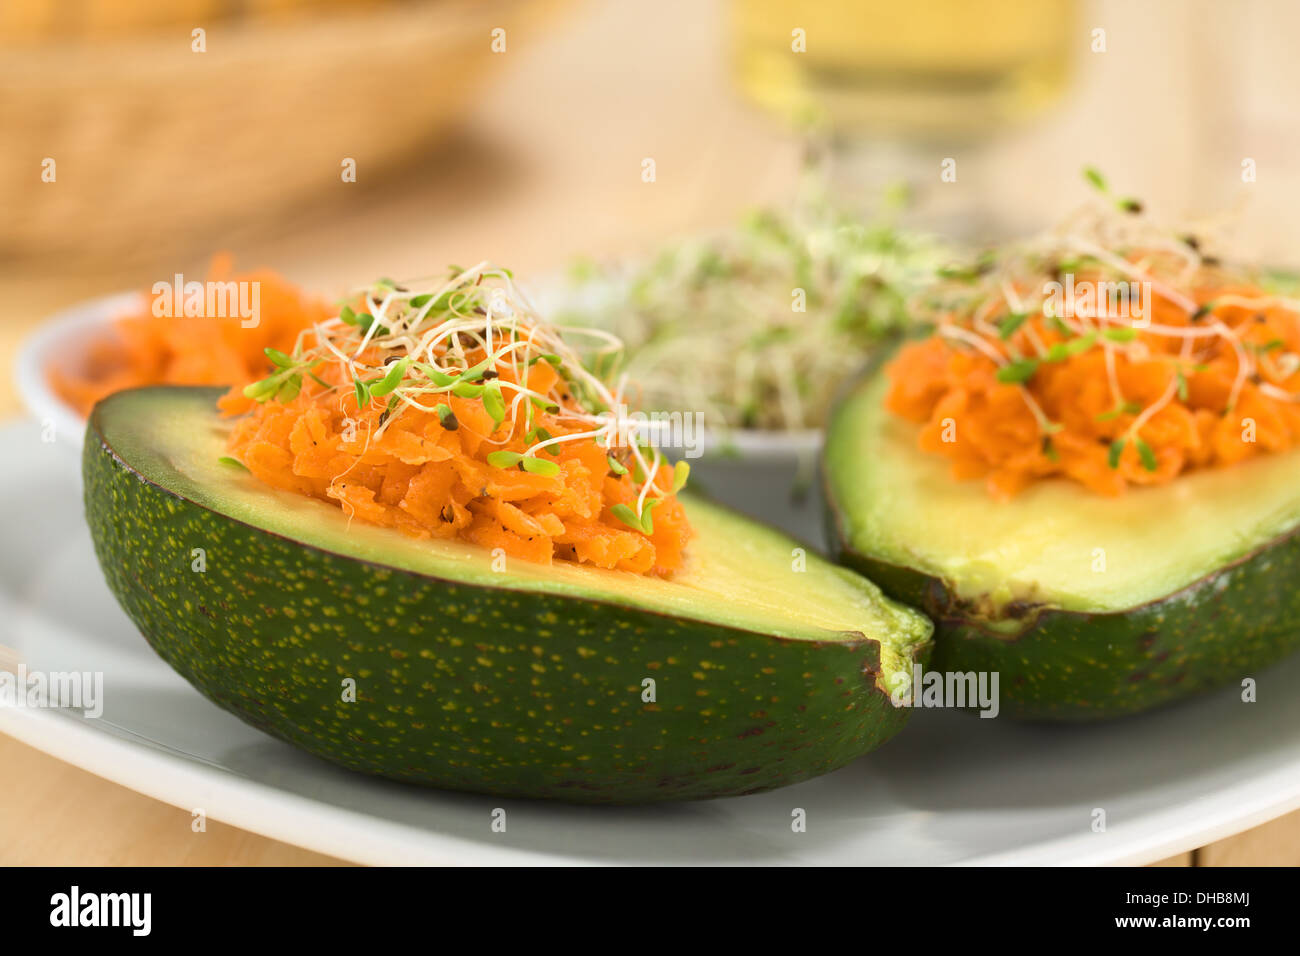 Avocado halves filled with grated carrot and sprinkled with alfalfa sprouts served on plate Stock Photo